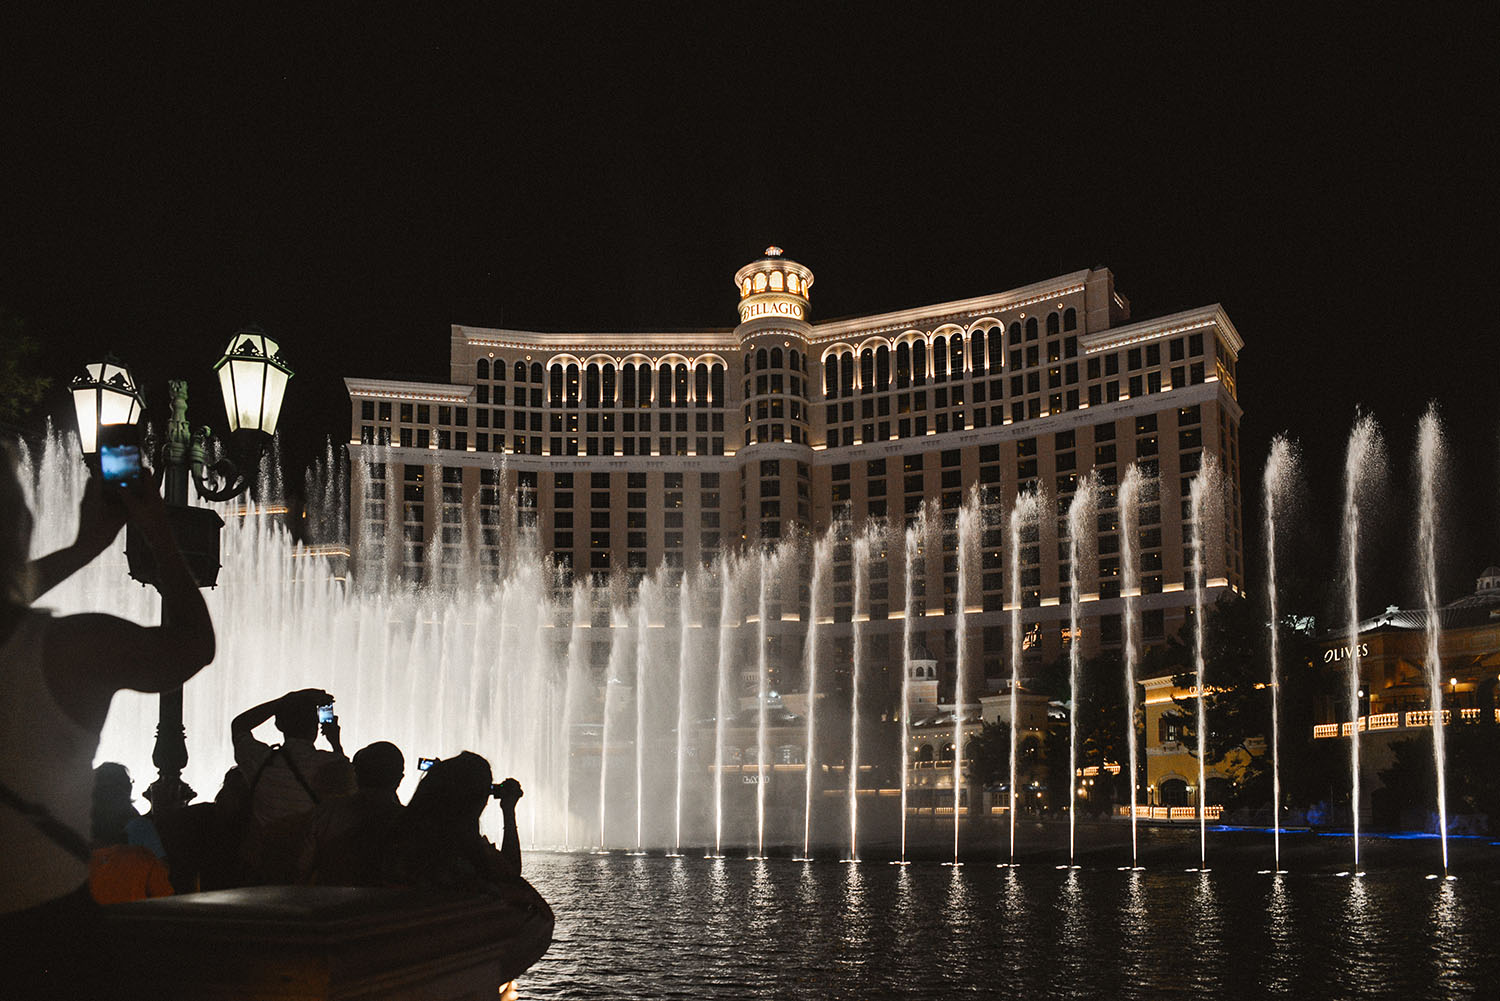 People taking photos of Fountains of Bellagio in Las Vegas